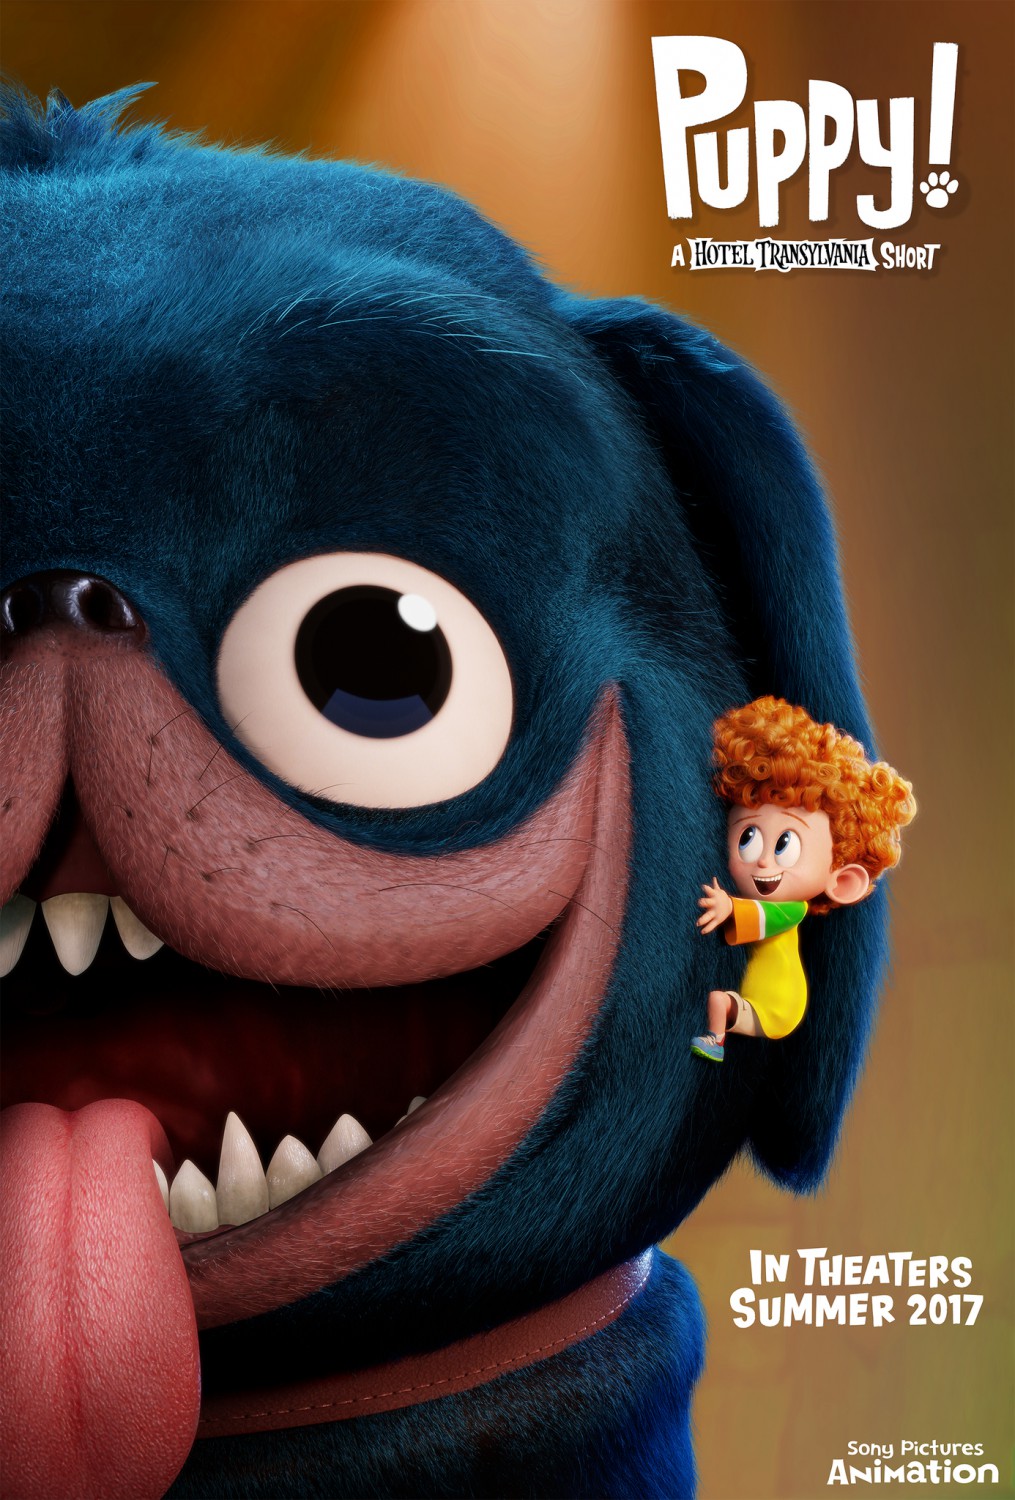 Extra Large Movie Poster Image for Puppy